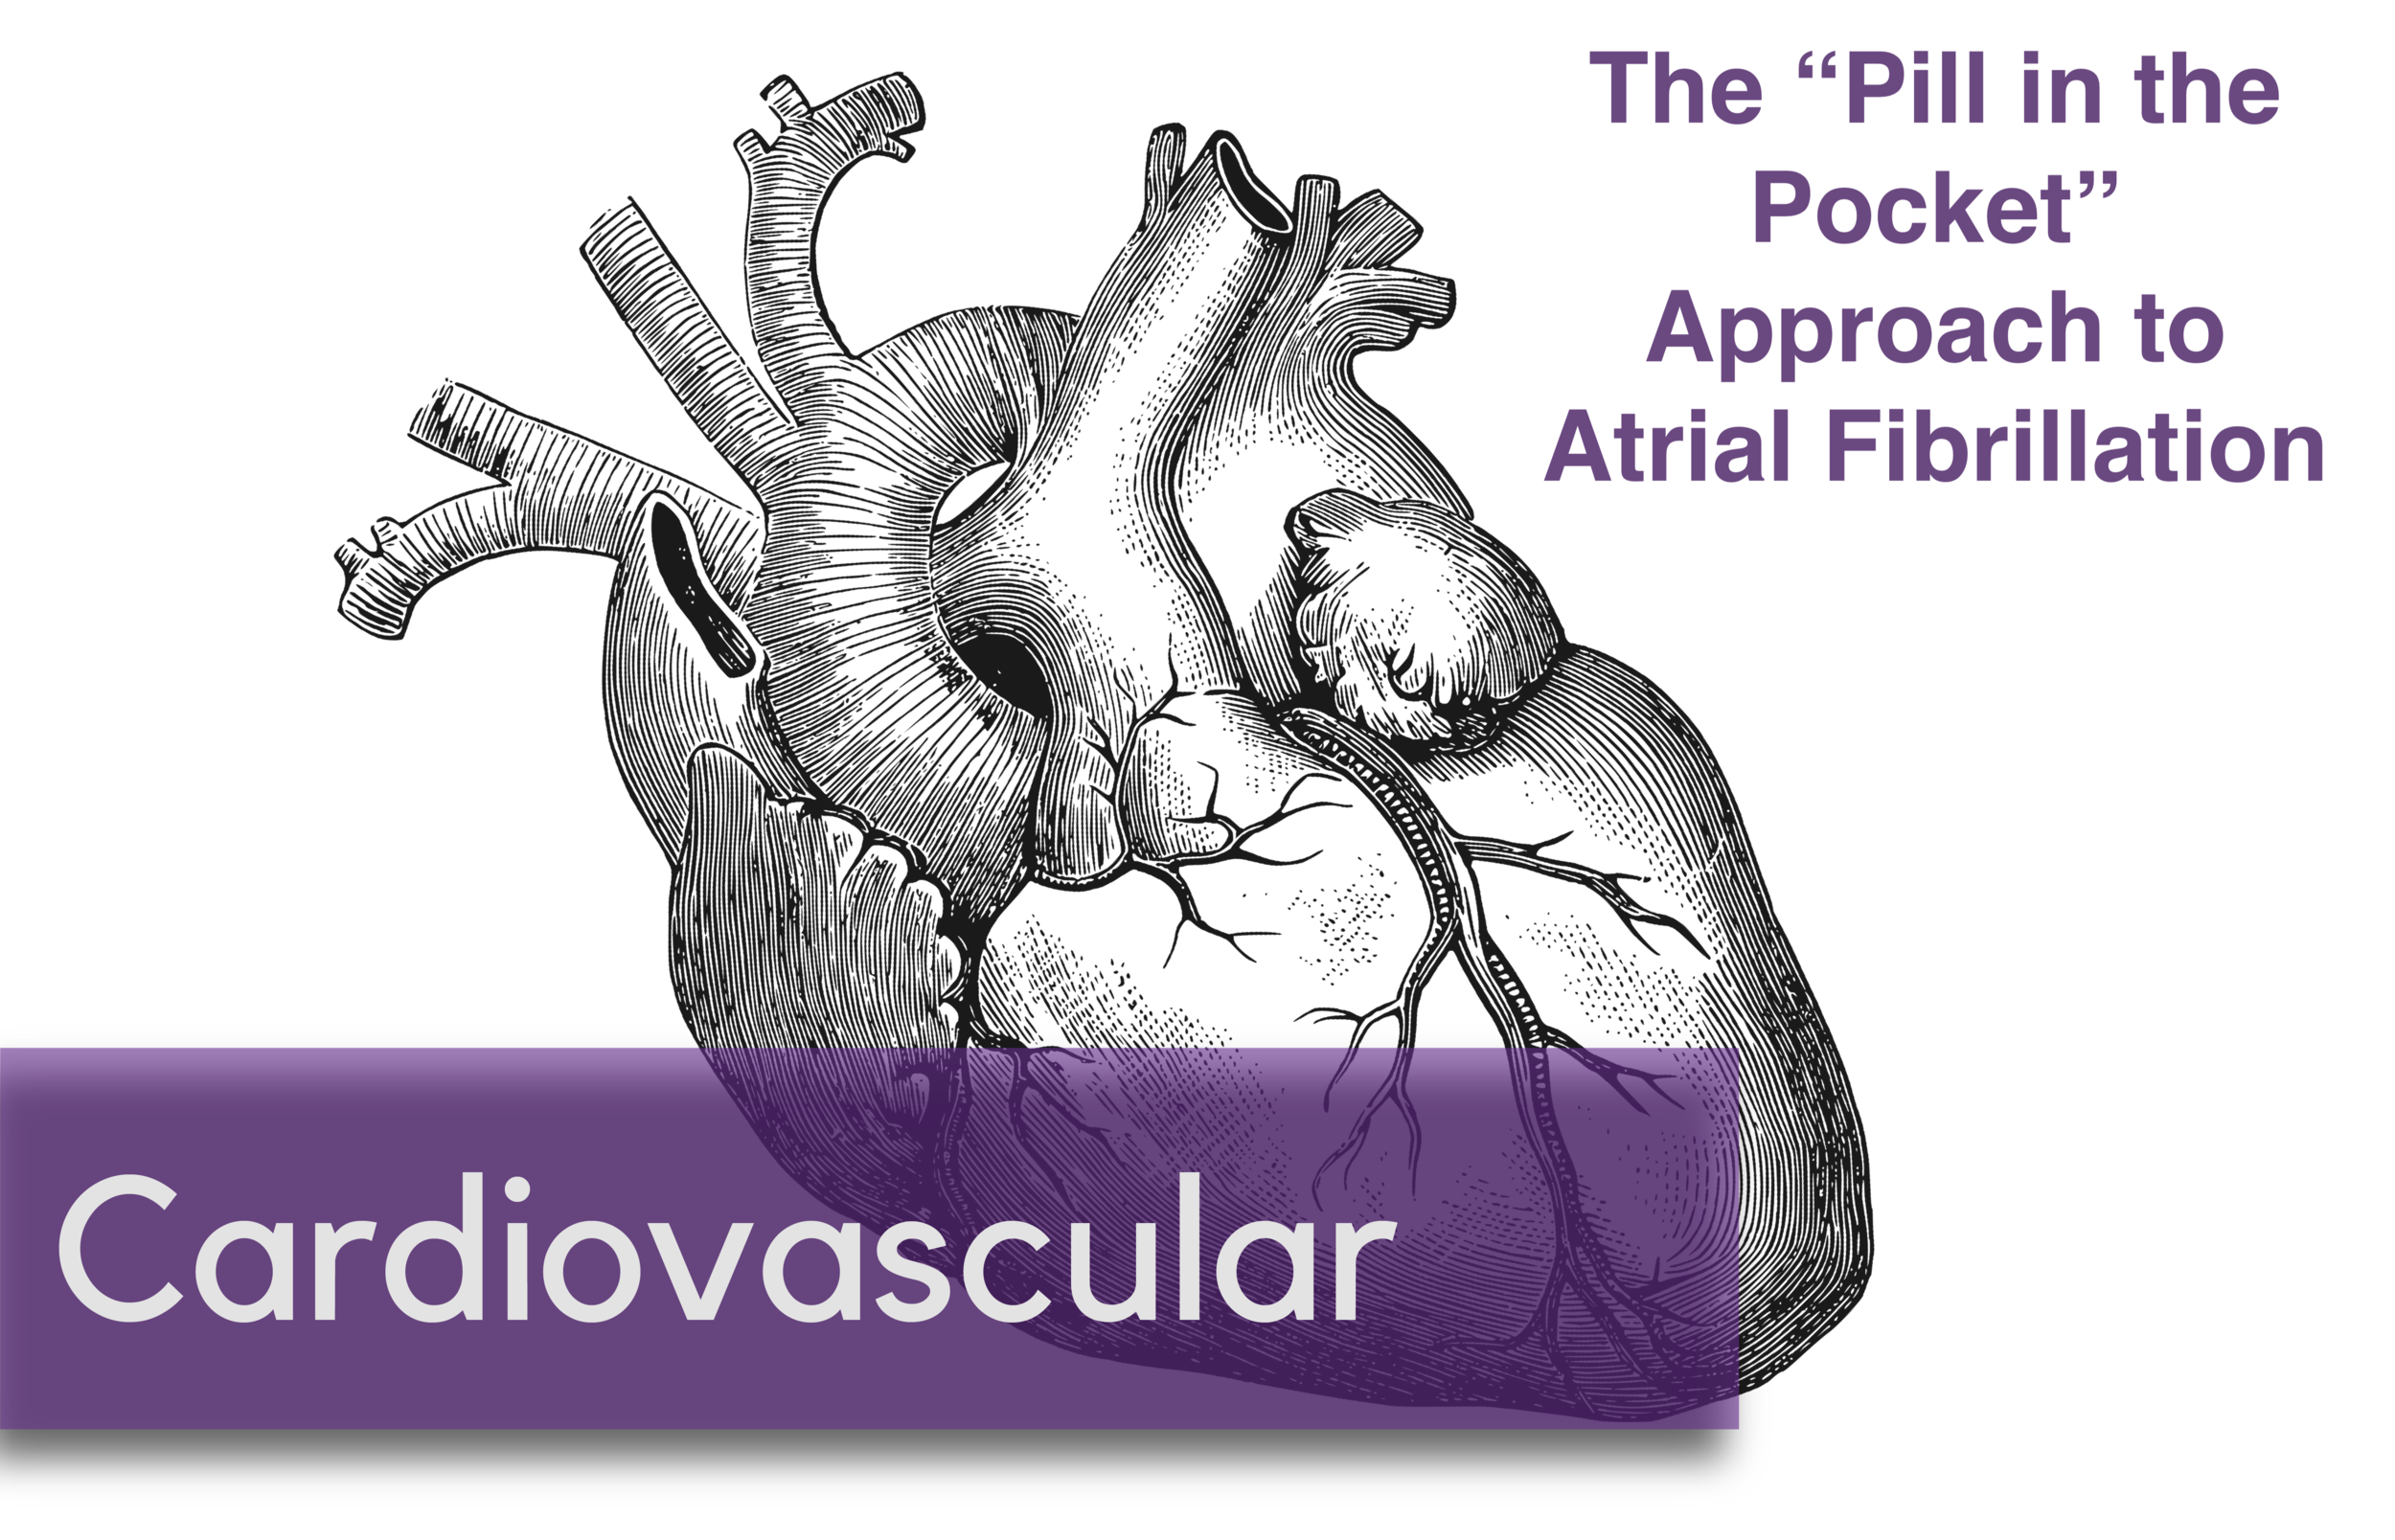 A “Pill-in-the-Pocket” Approach to Paroxysmal Atrial Fibrillation